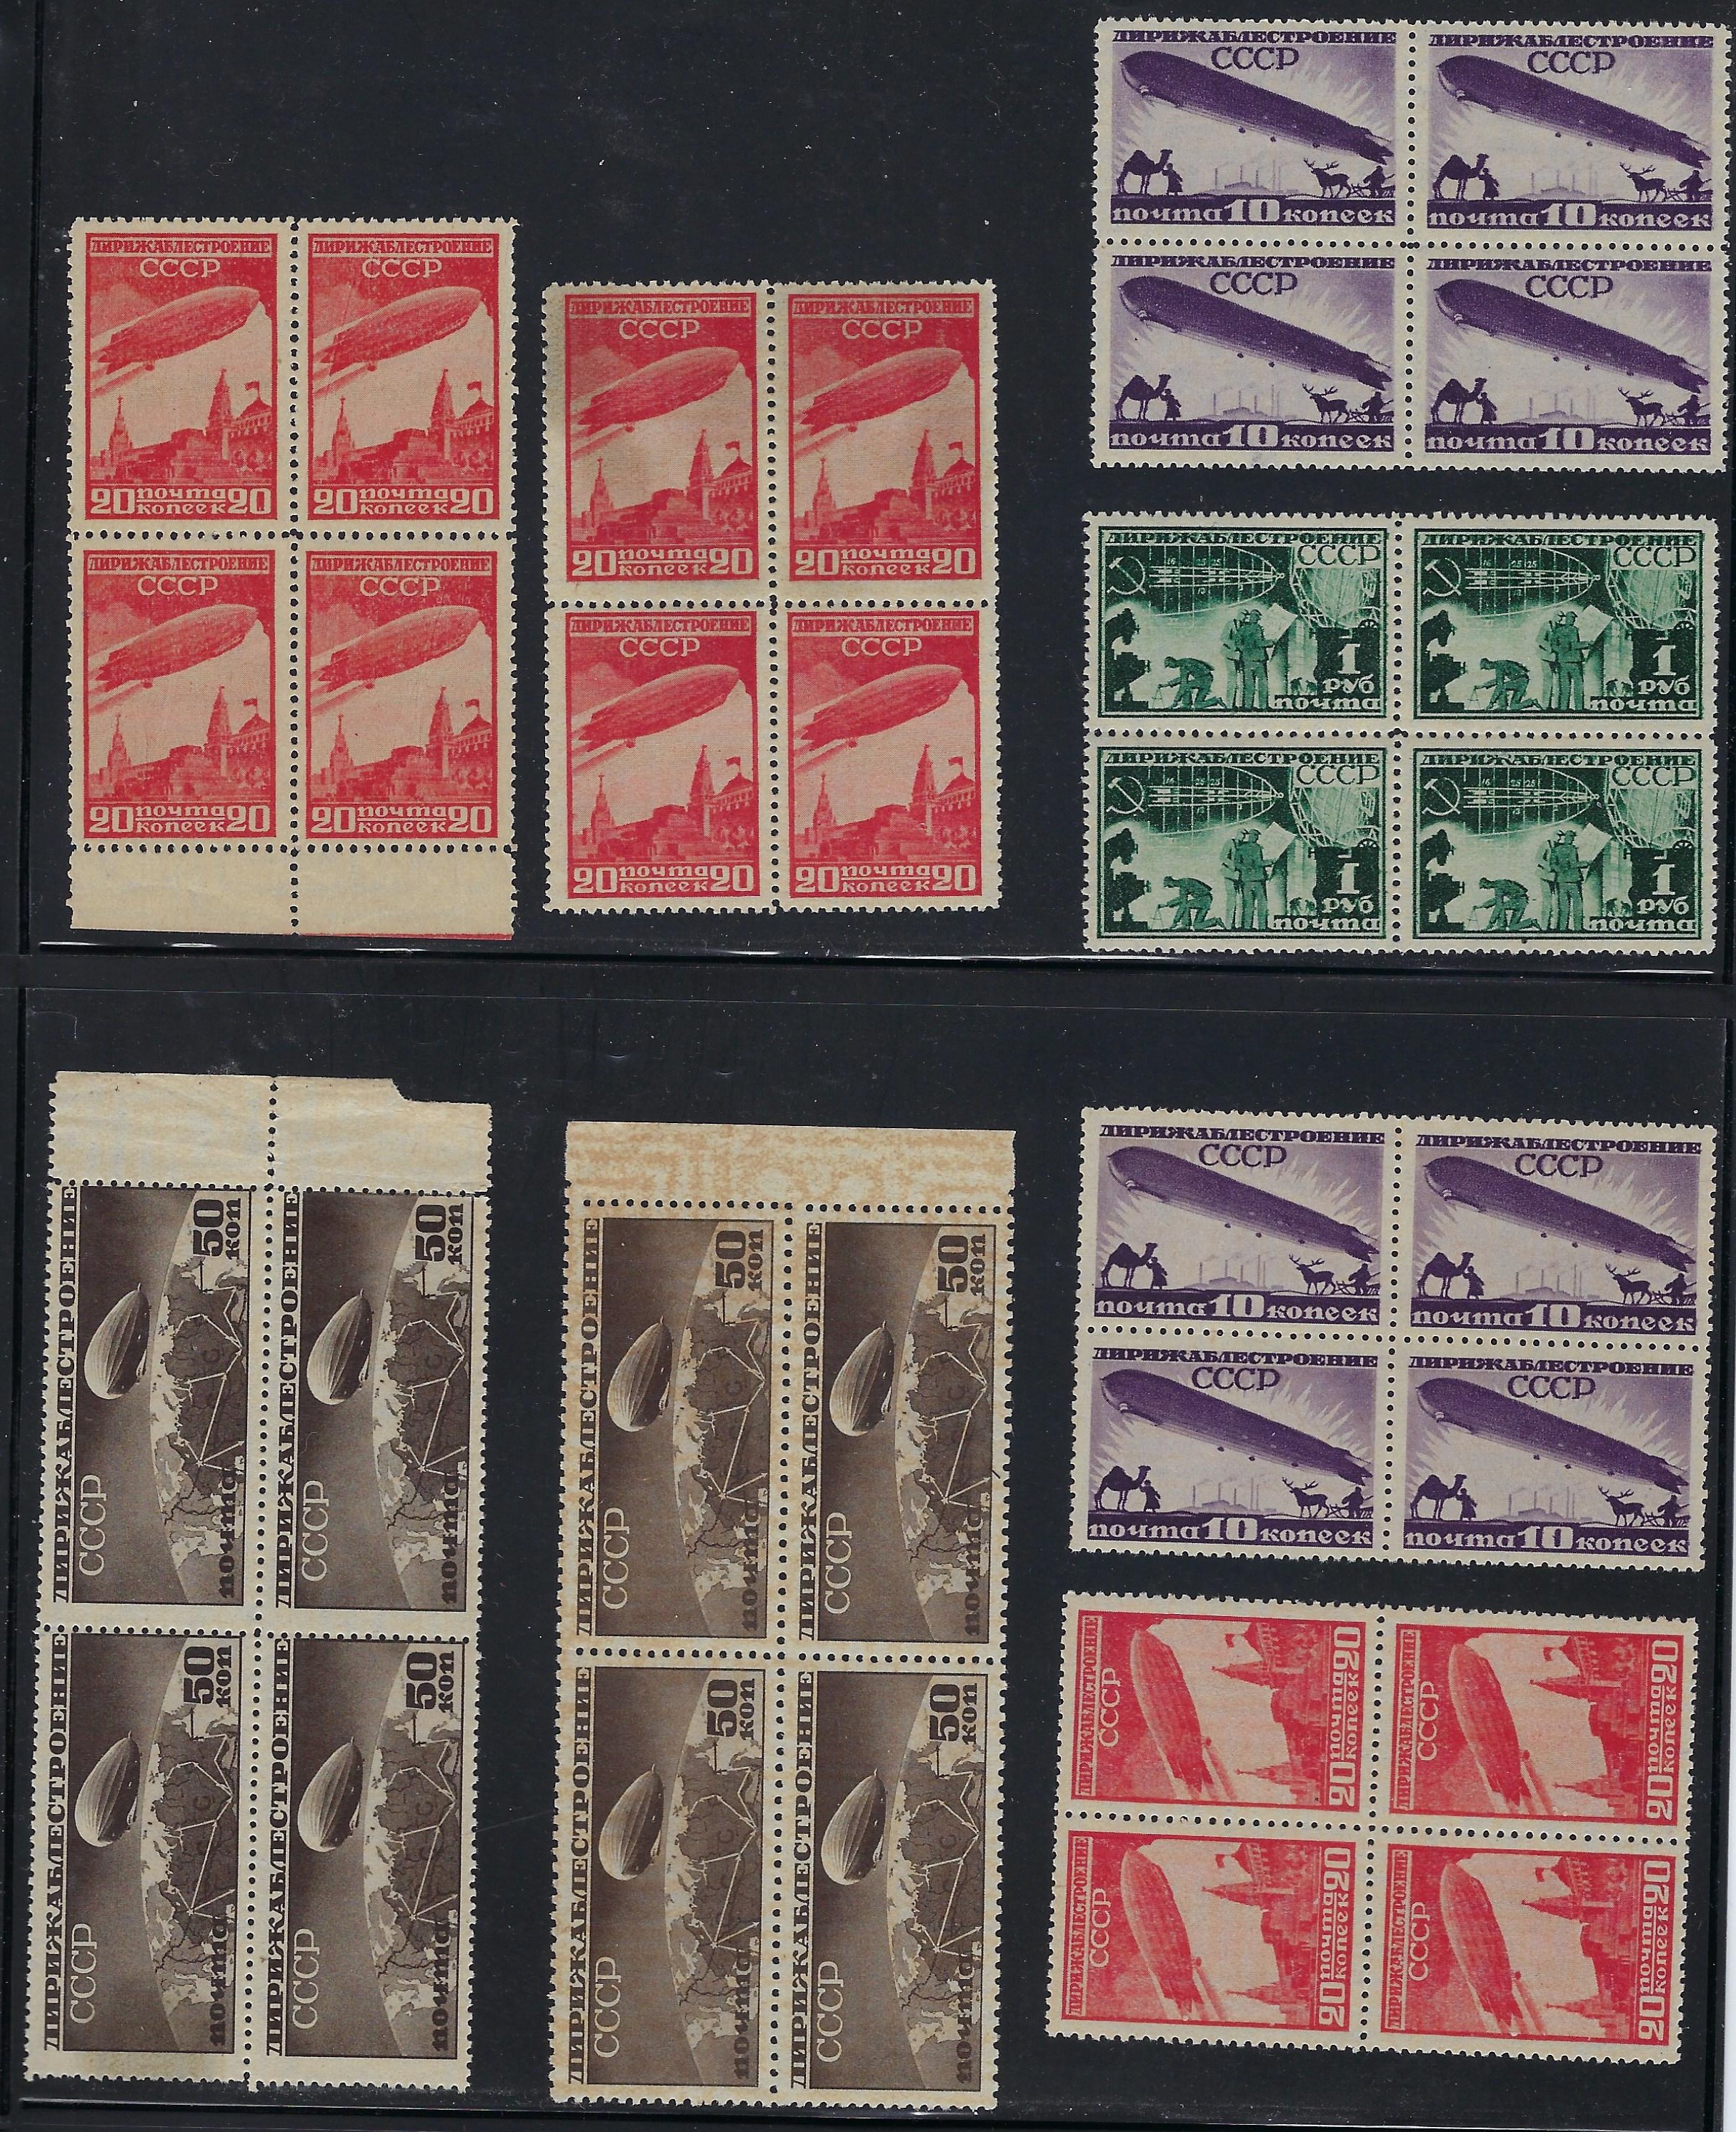 Russia Specialized - Airmail & Special Delivery AIR MAILS Scott C20/24 Michel 397/401 